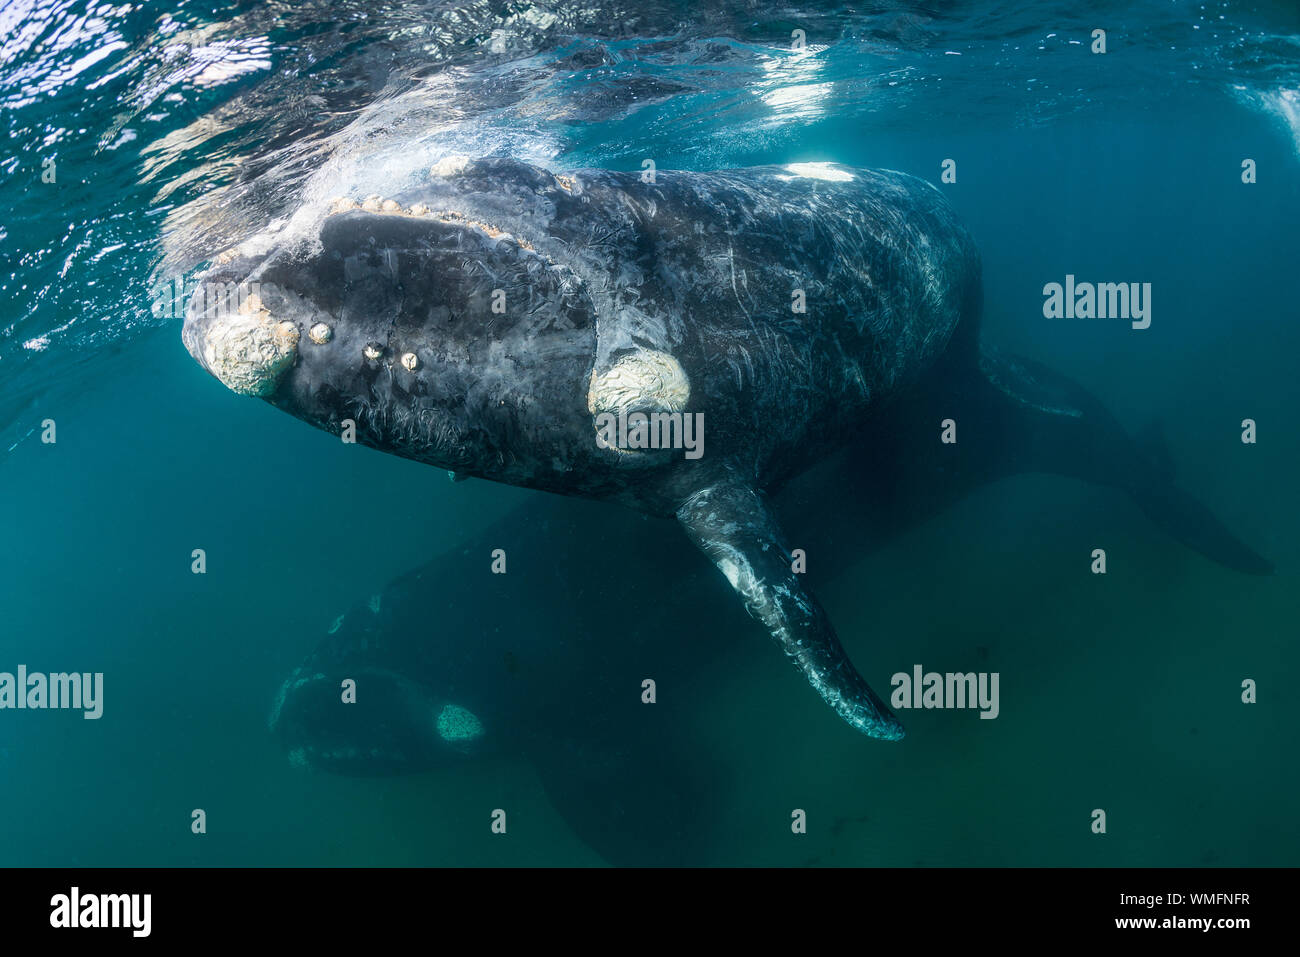 Southern right whale, Eubalaena australis, and her calf in the shallow protected waters of the Nuevo Gulf, Valdes Peninsula, Argentina. Stock Photo